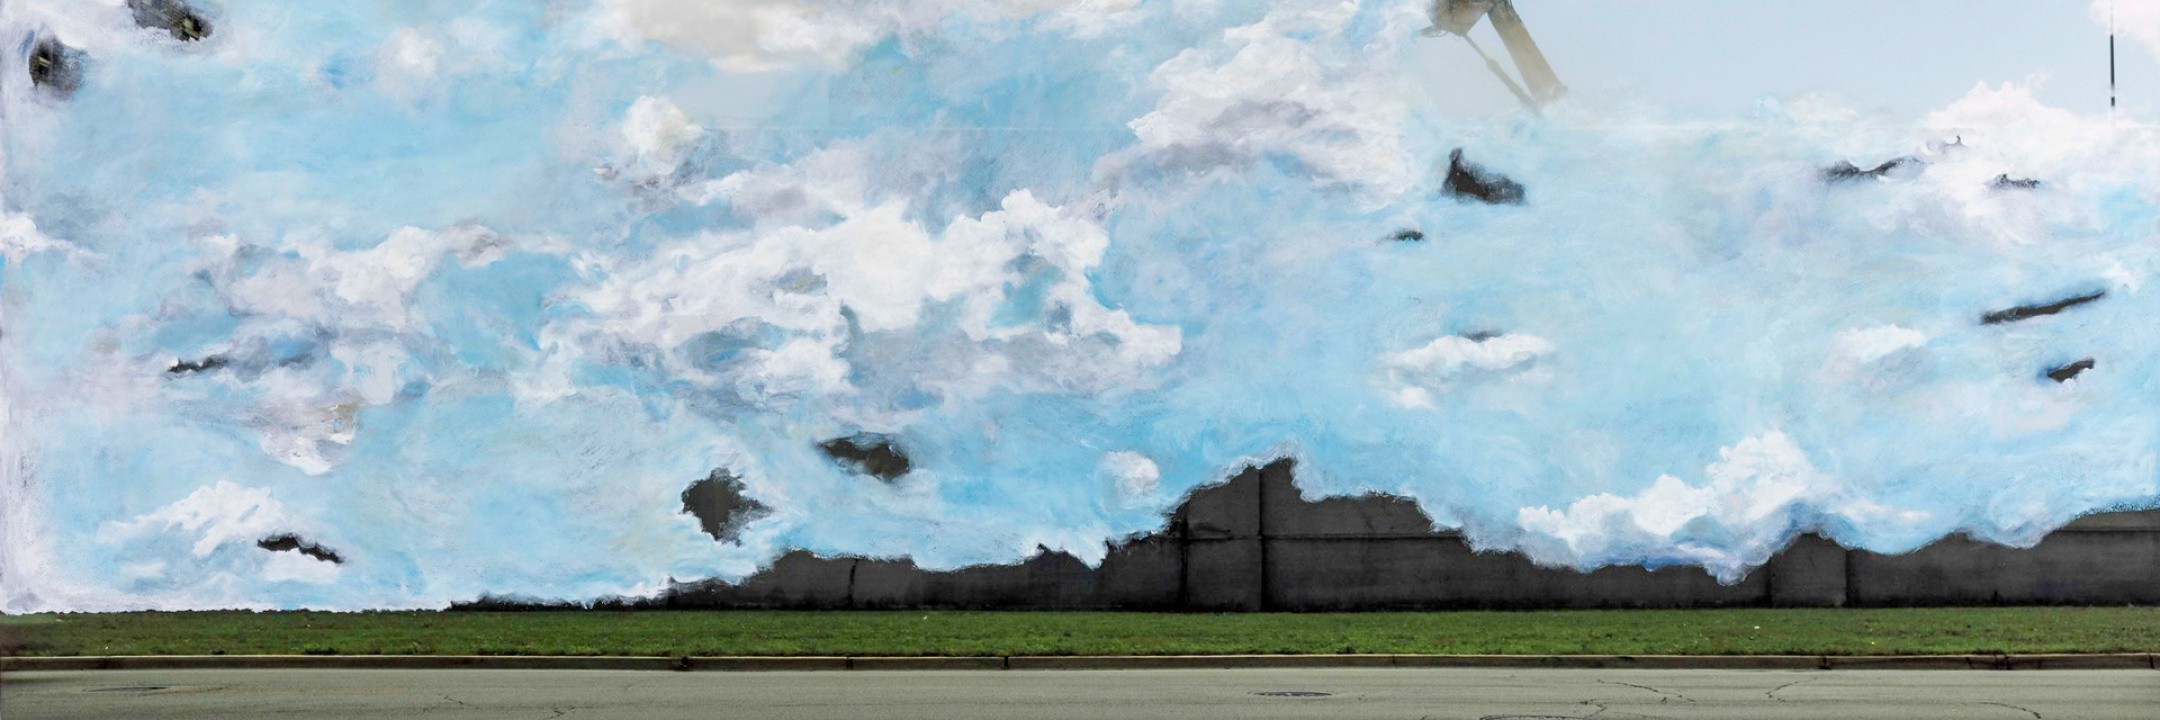 A blue sky and clouds initially looks peaceful, but small details of detriment appear in the sky, looking ominious. The painting appears to be of the sky, but at the bottom, a street, grass, and prison appear from behind the clouds.